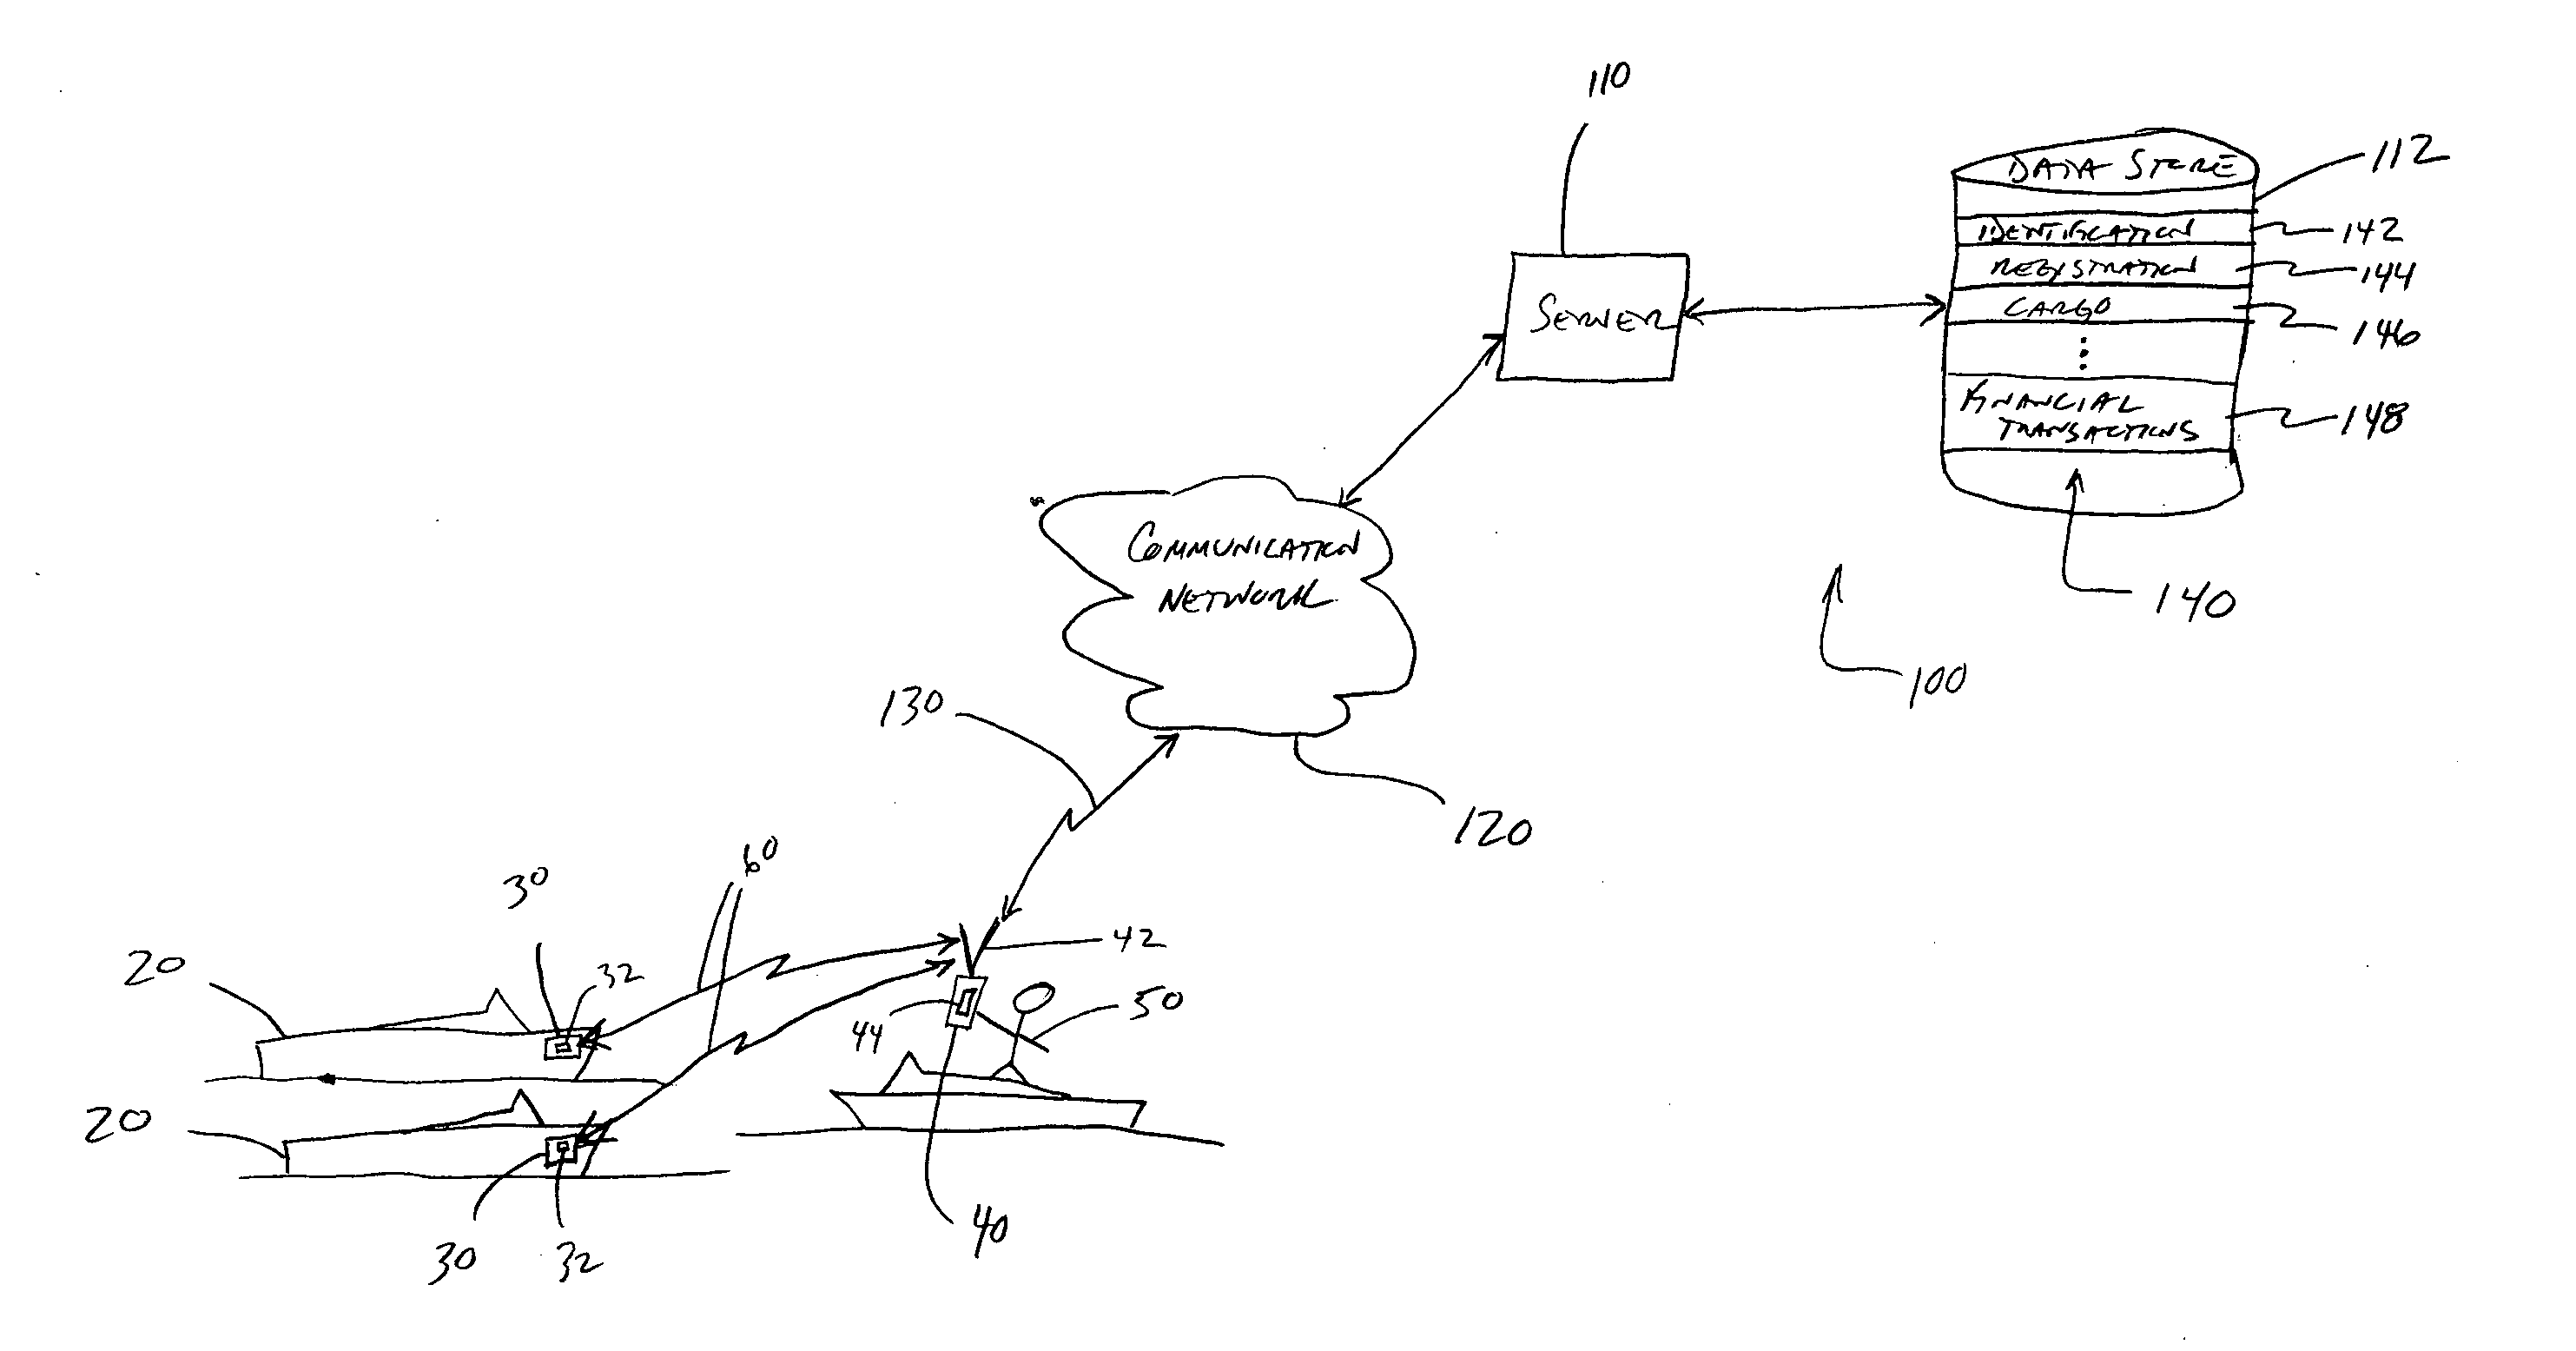 System and method for identifying objects of value